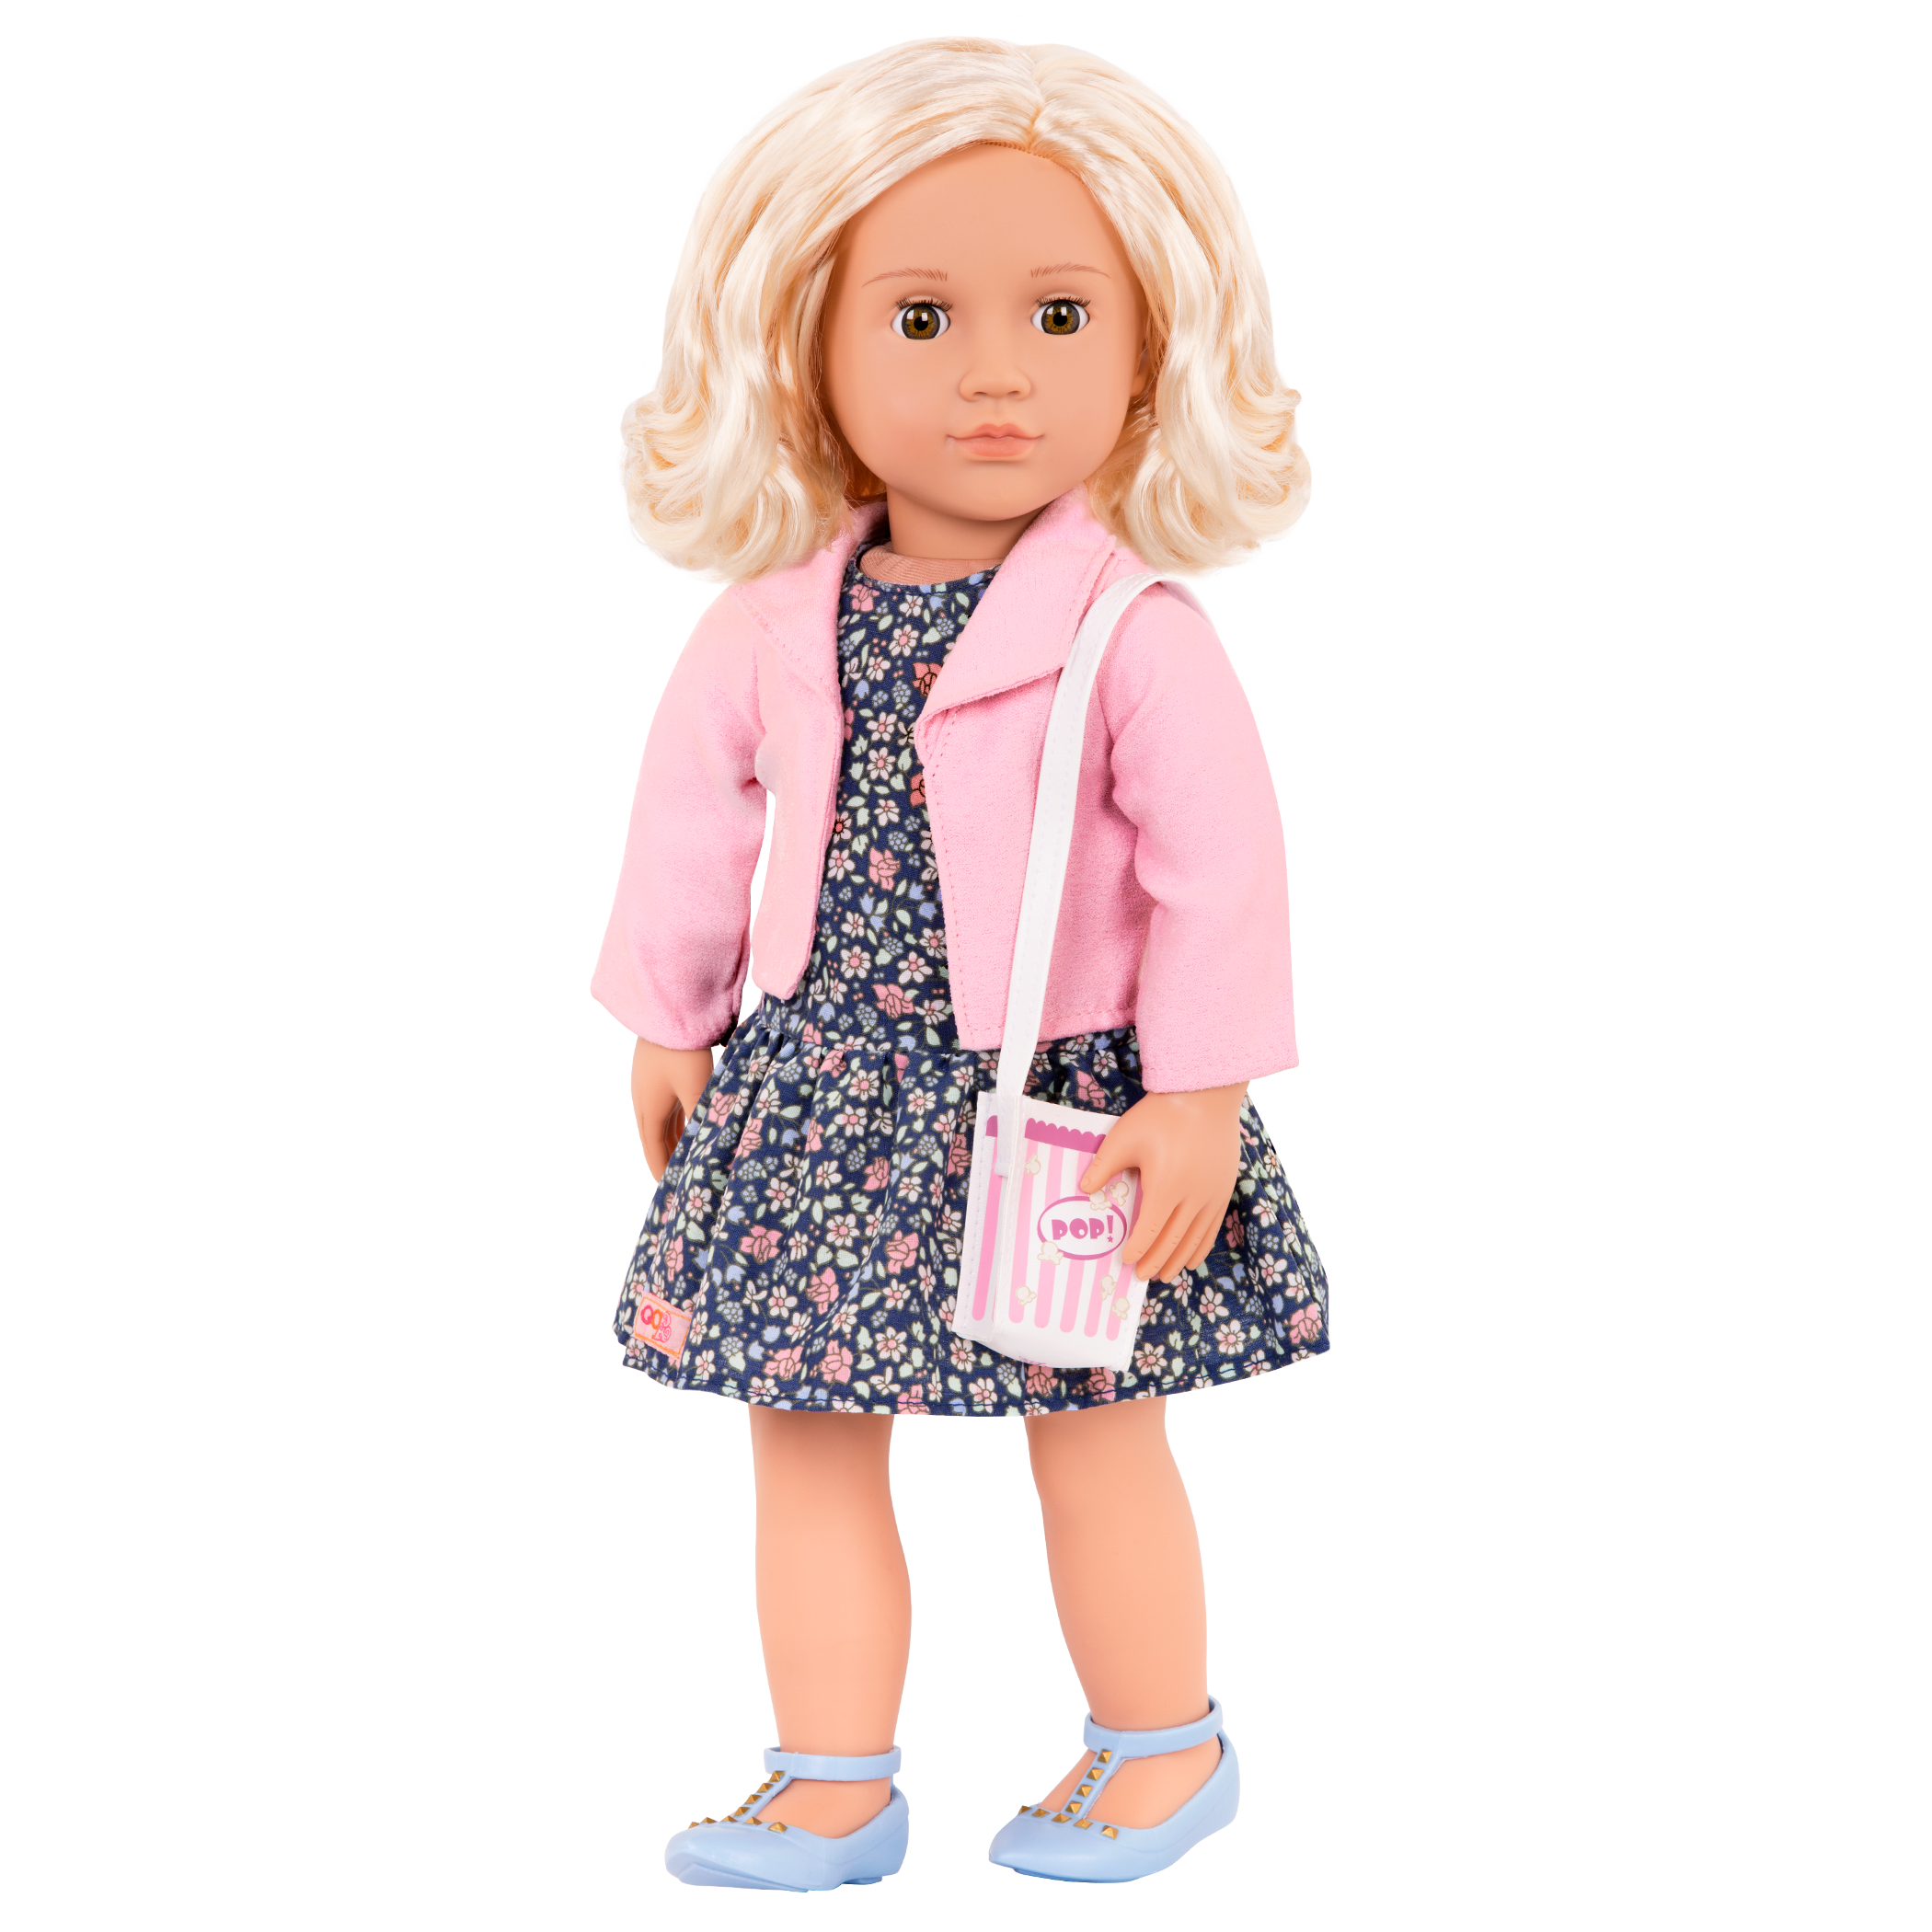 Popcorn Pizazz - 18-inch Doll Outfit with Ivory wearing jacket